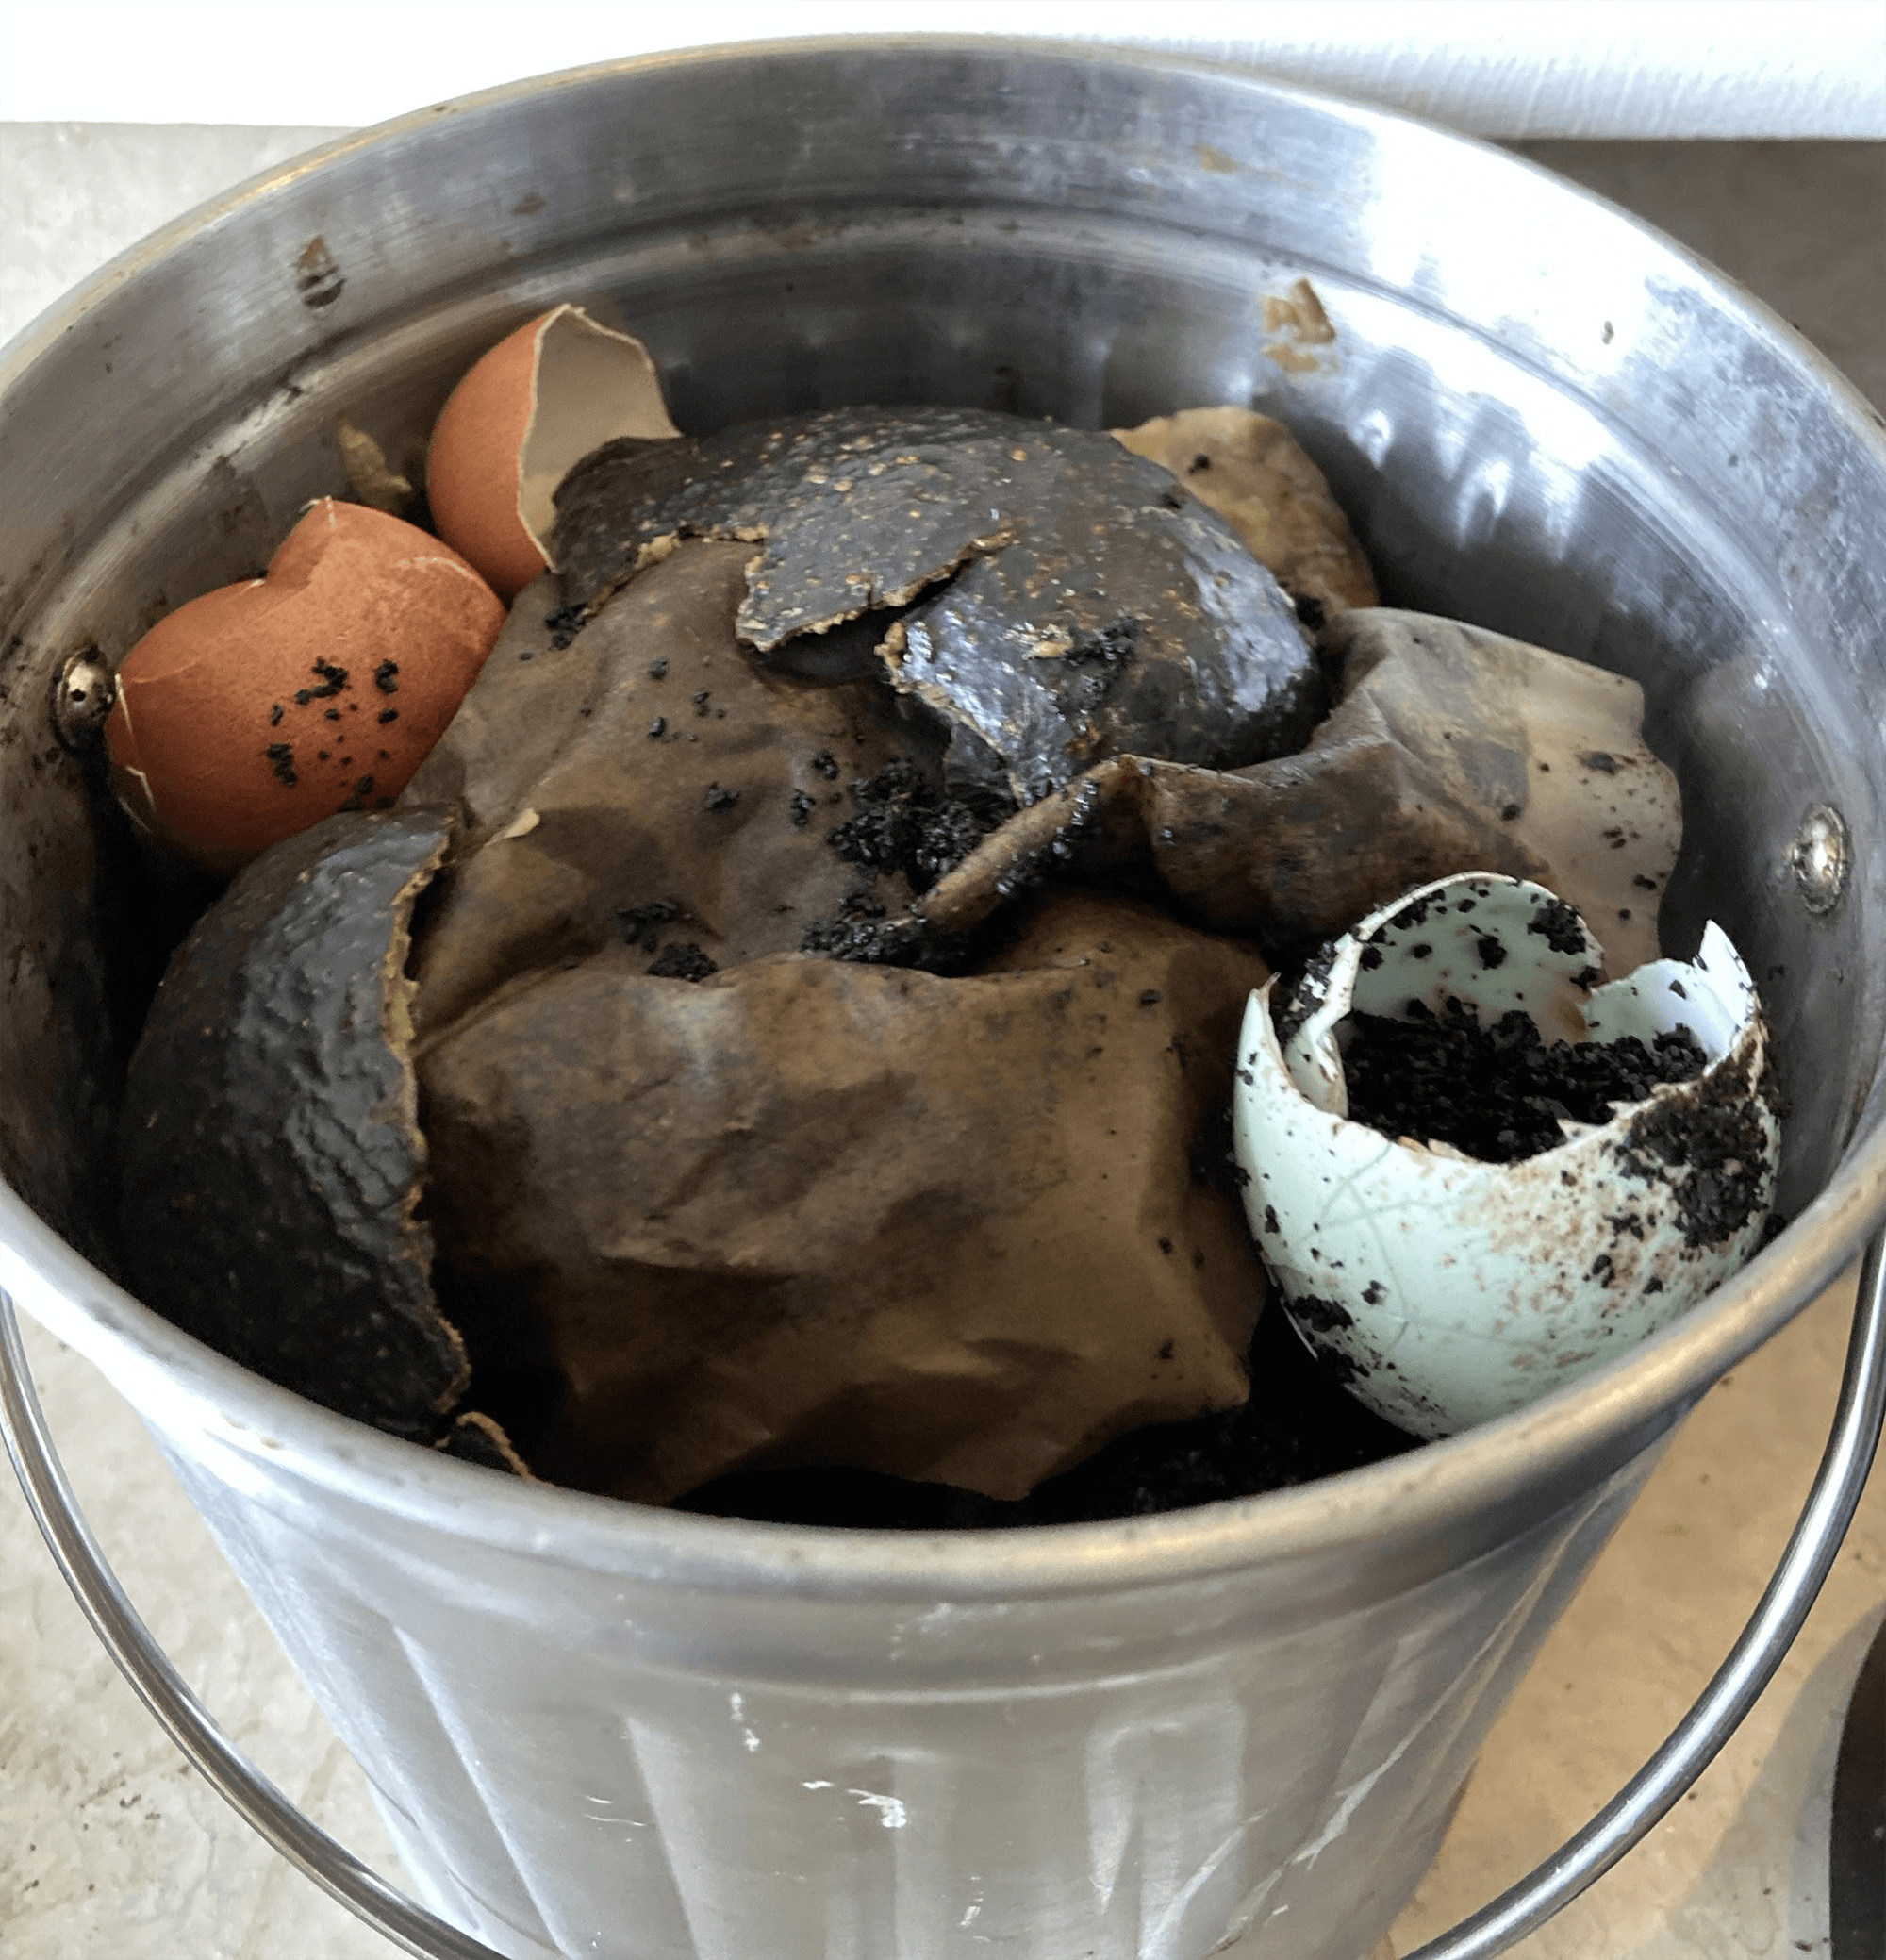 Figure 3. Small compost tin can full of eggshells, coffee grinds, and avocado peel.